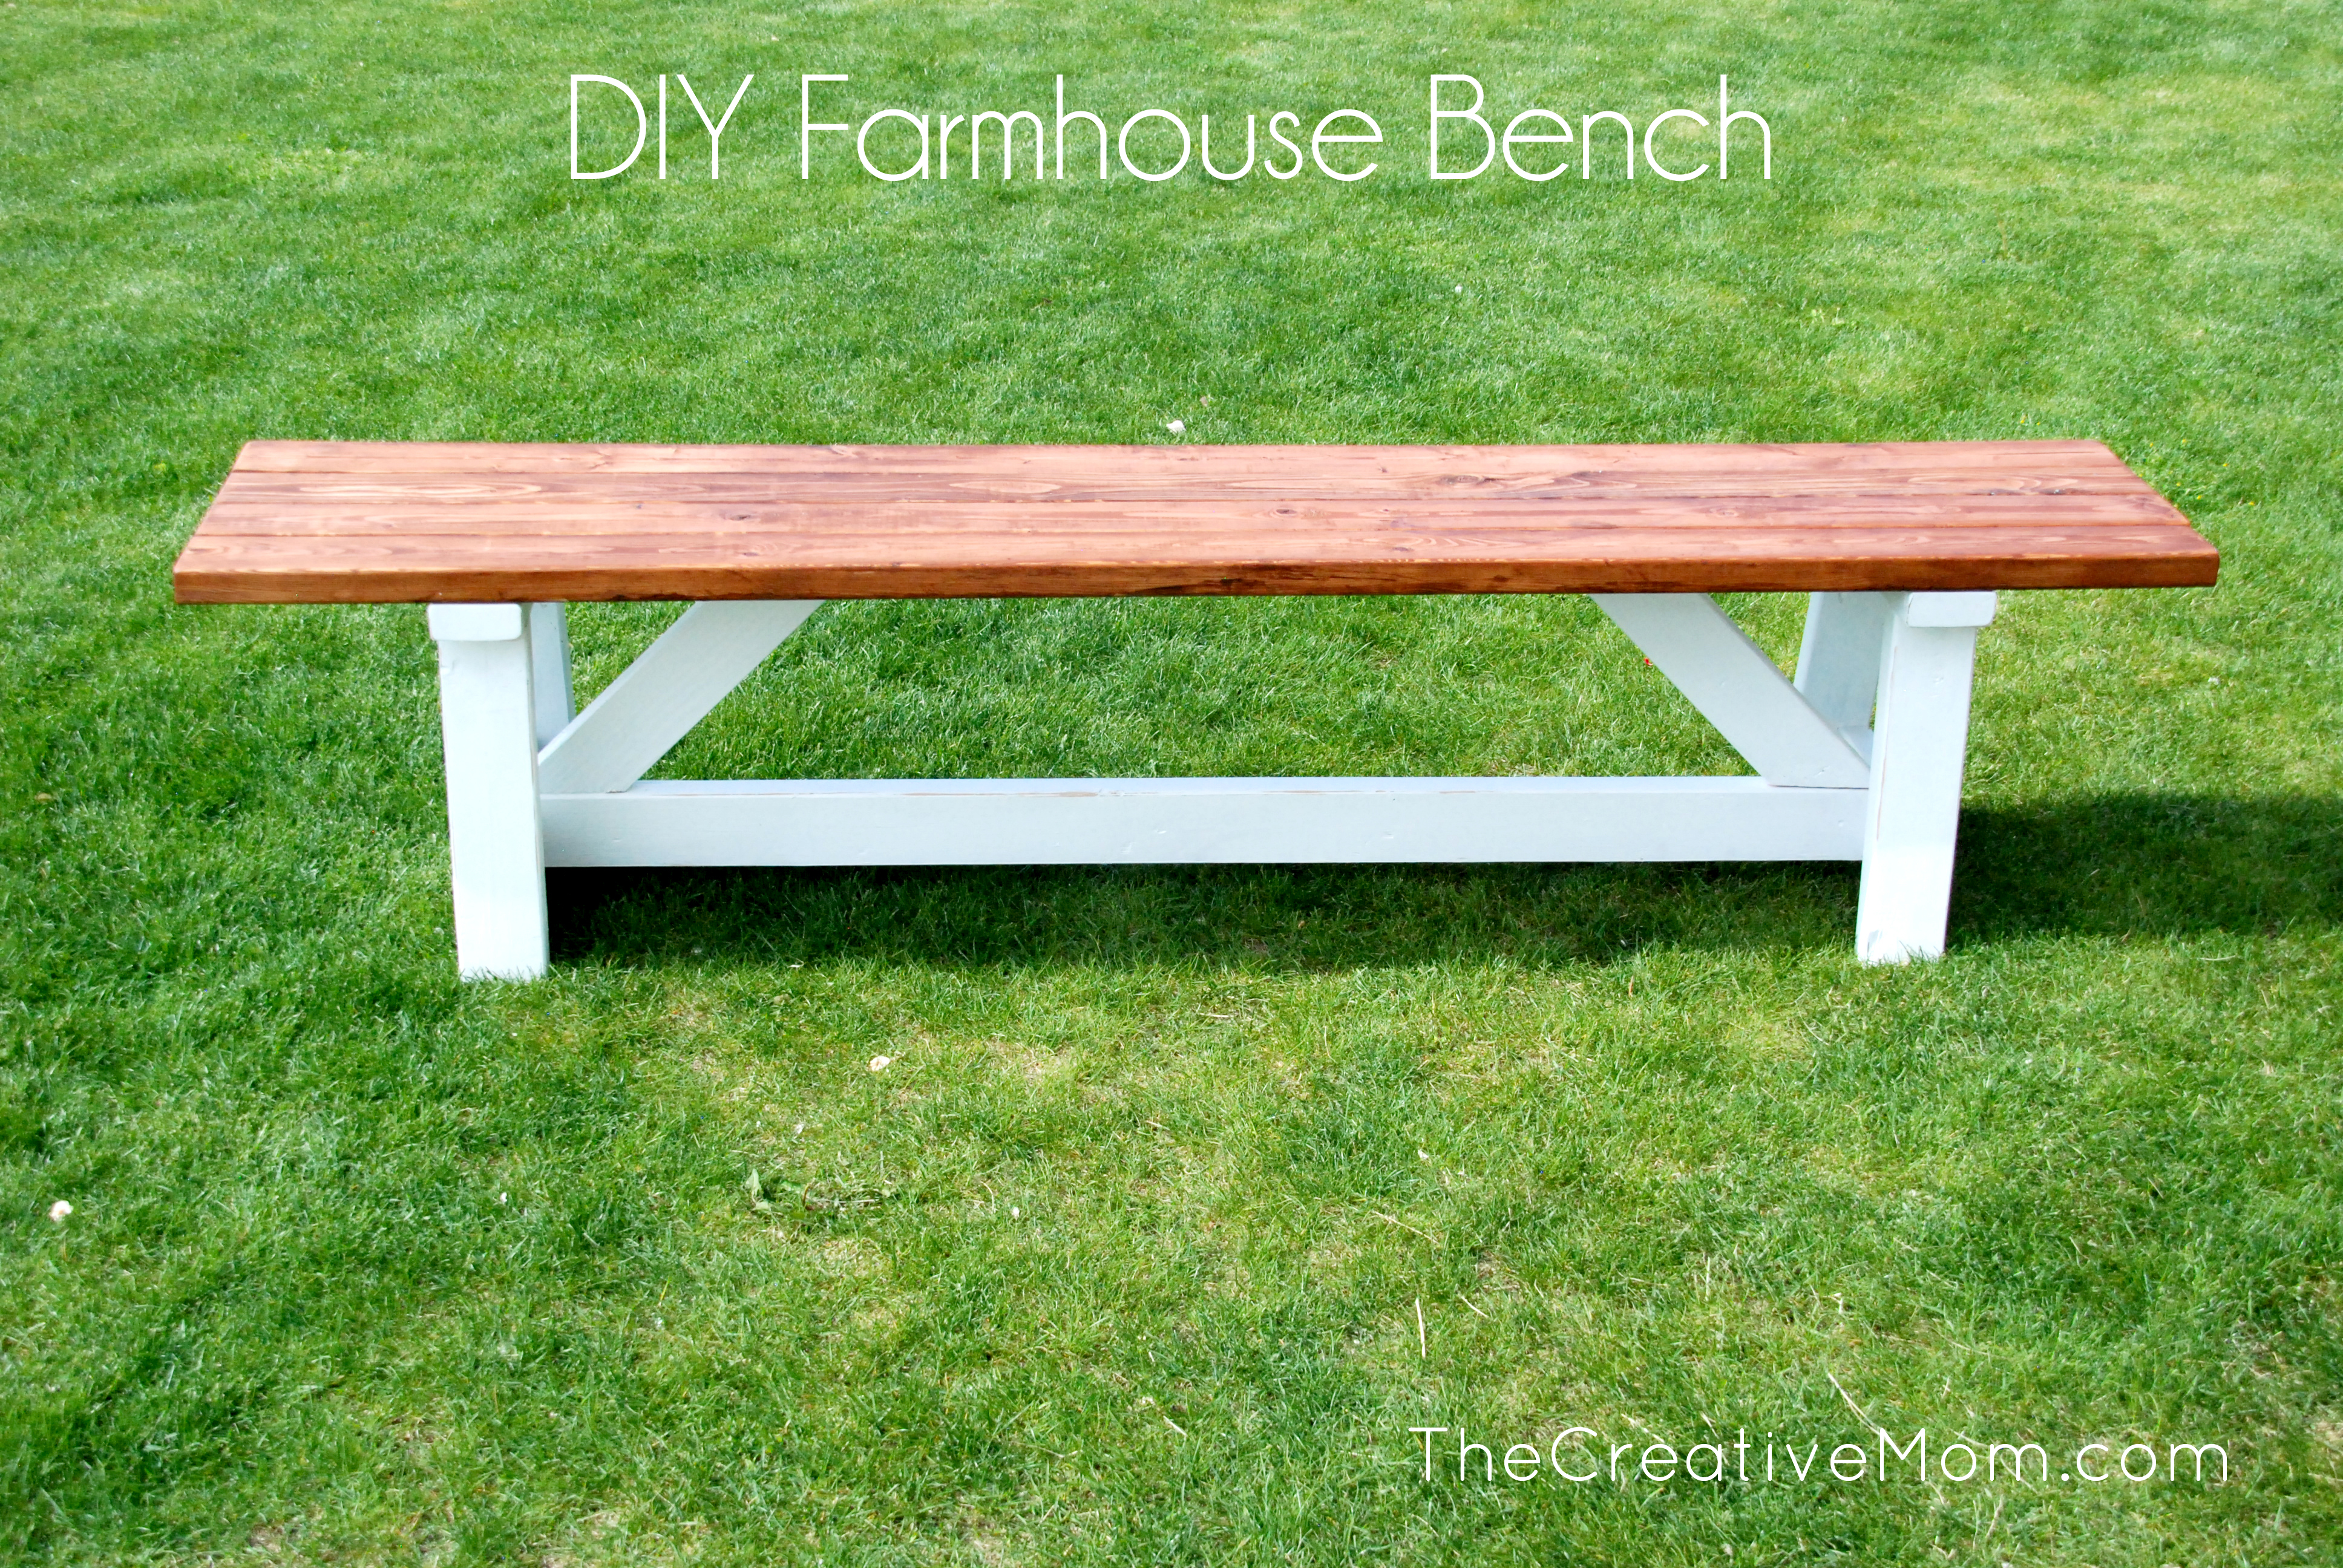 How to build a bench - The Creative Mom